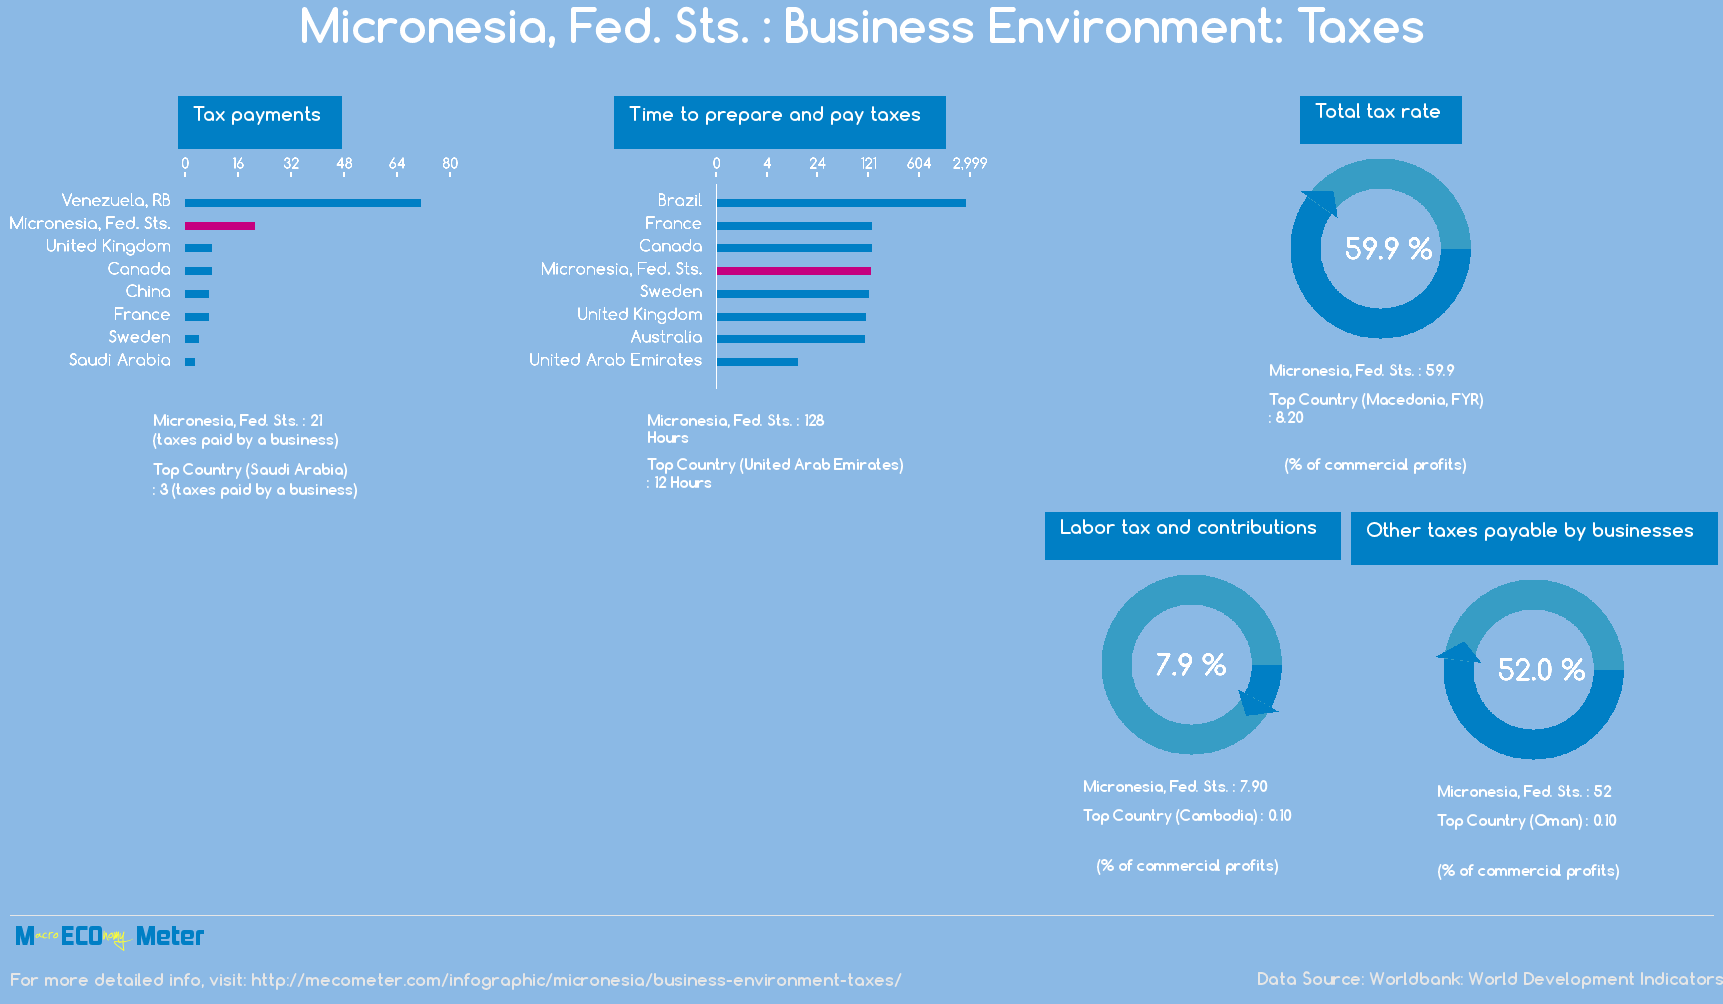 Micronesia, Fed. Sts. : Business Environment: Taxes